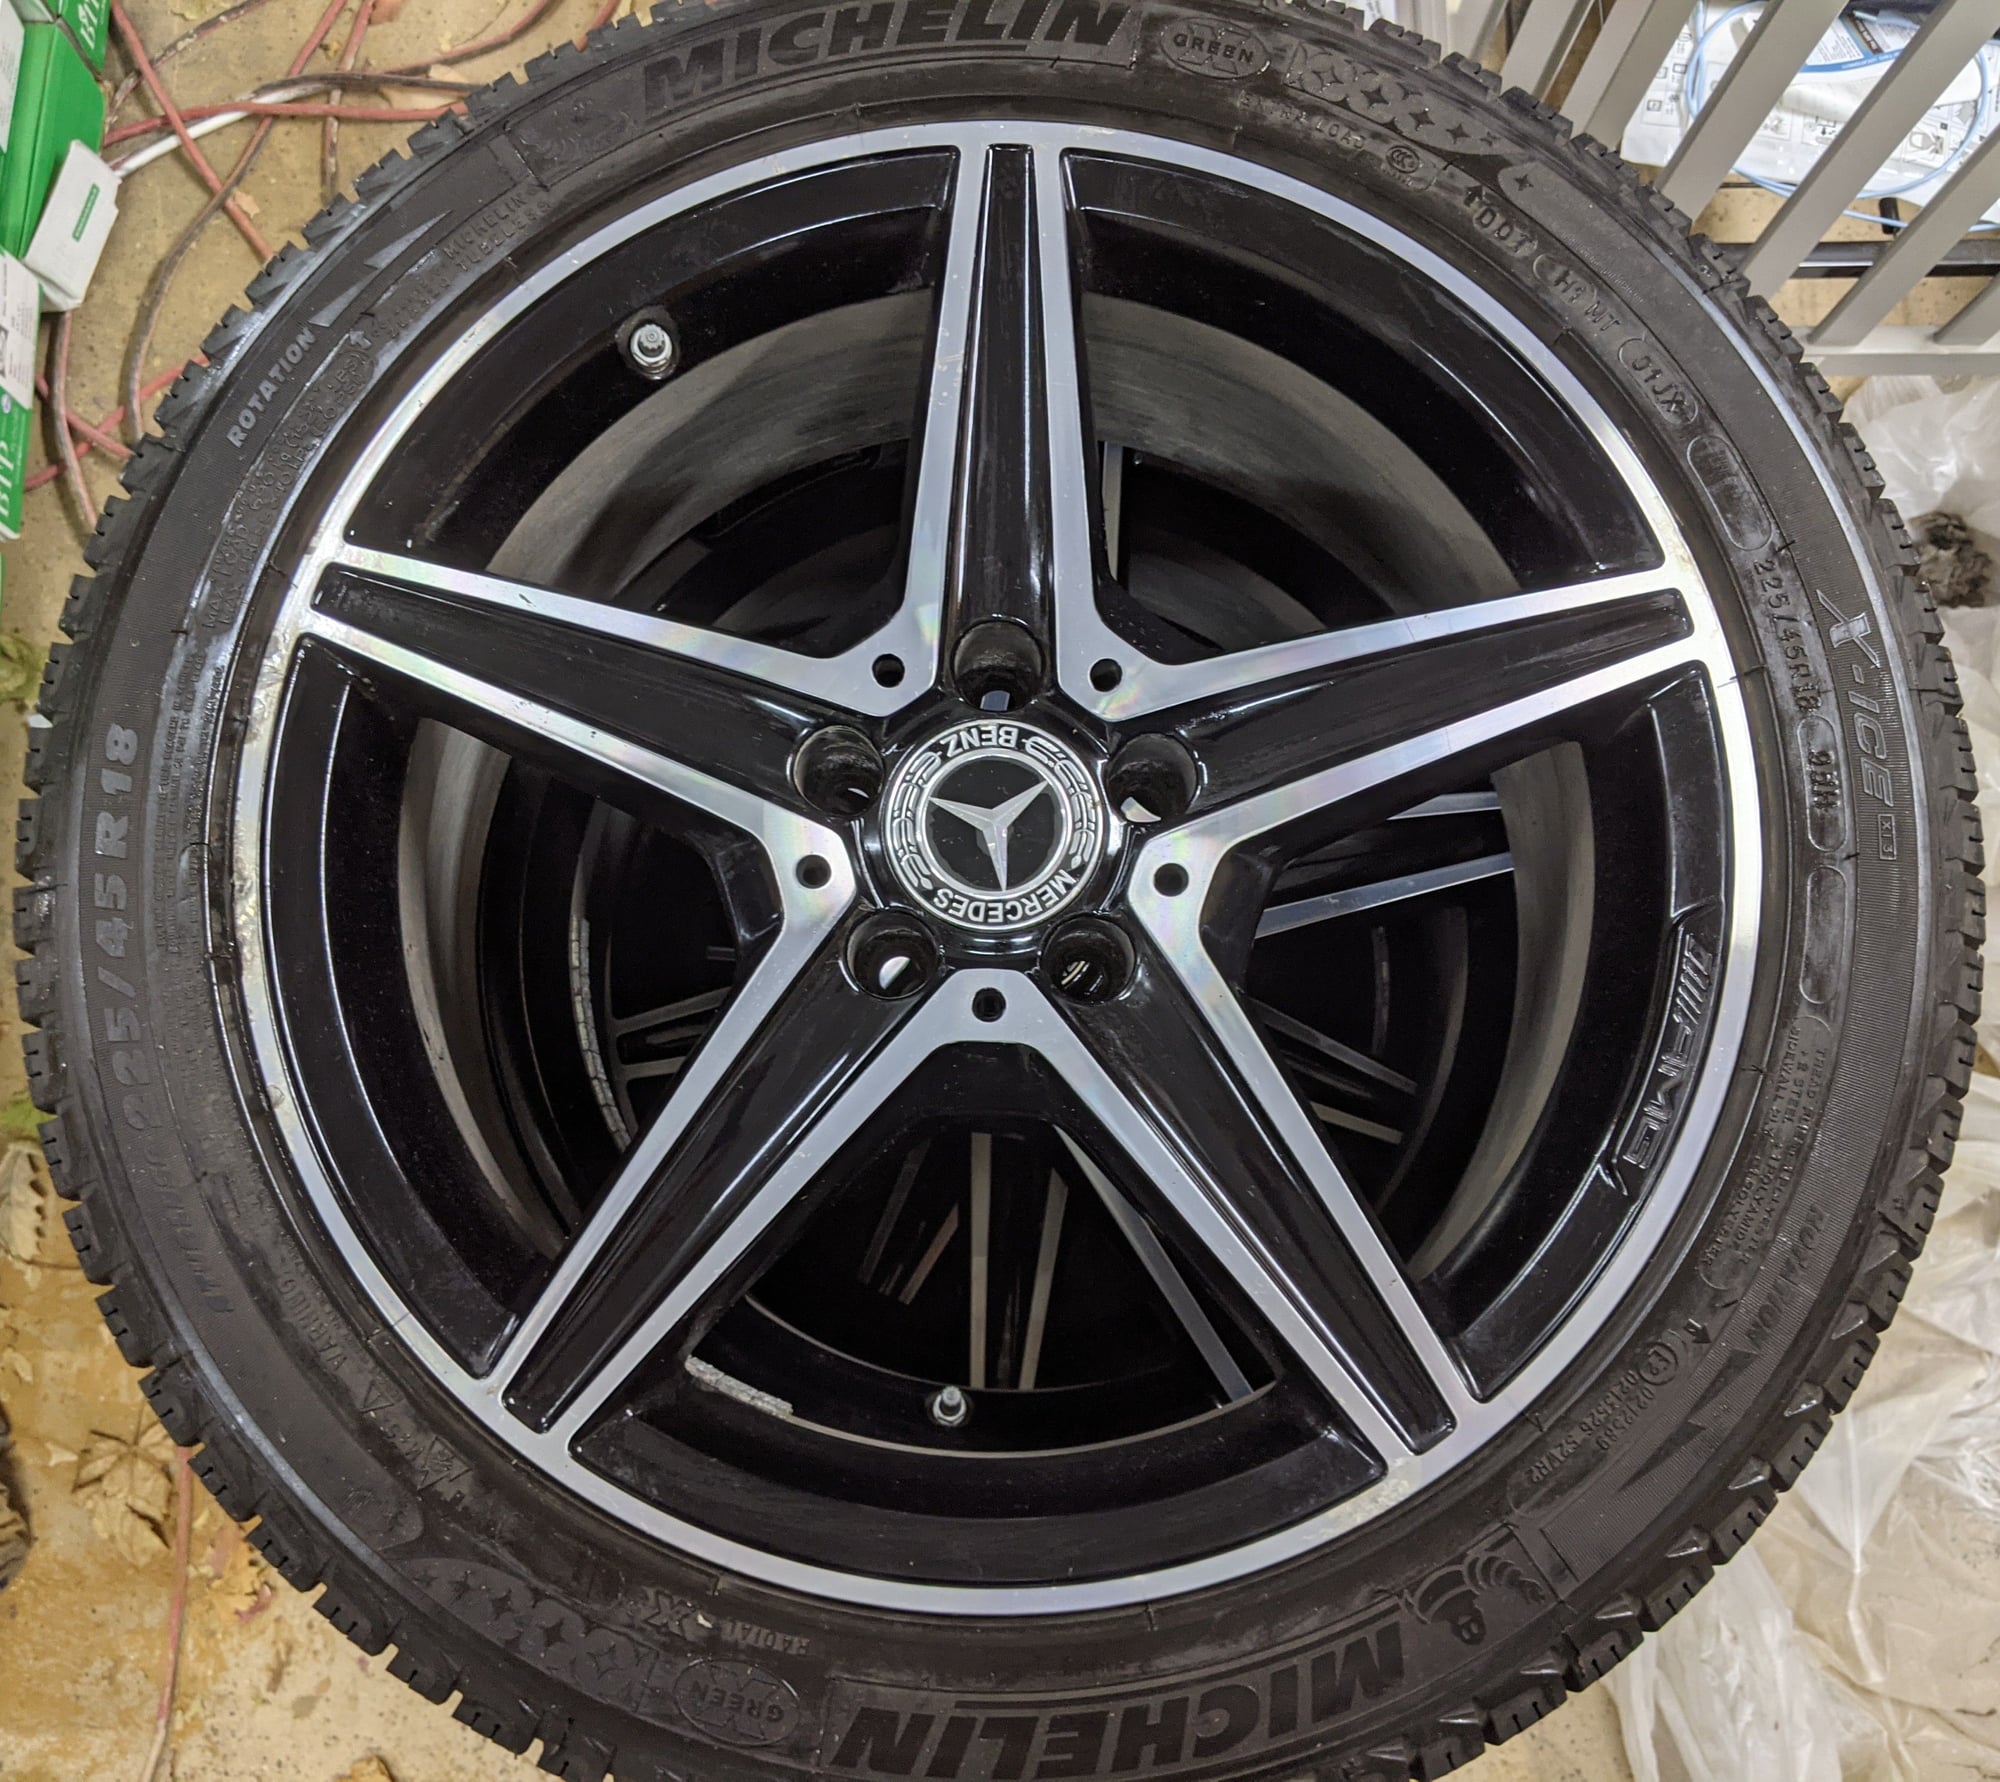 Wheels and Tires/Axles - W205 18" 5-spoke AMG wheels - Used - 2015 to 2020 Mercedes-Benz C300 - Chaska, MN 55318, United States